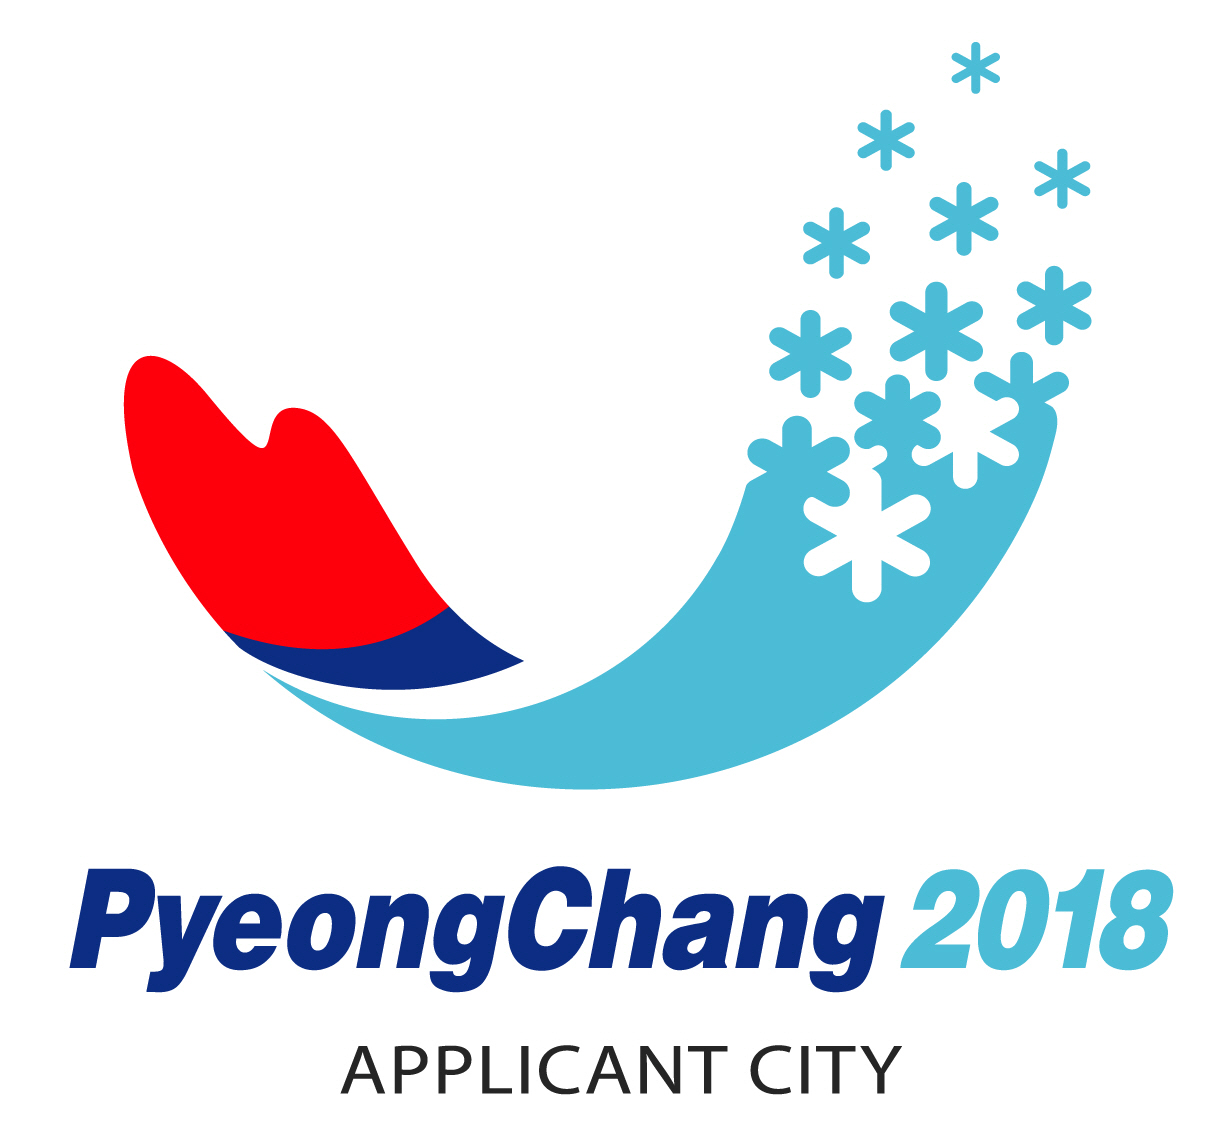 It may not have been the most conventional way of choosing a logo, but this is the design Pyeongchang used to push its bid for the 2018 Games ©Pyeongchang 2018